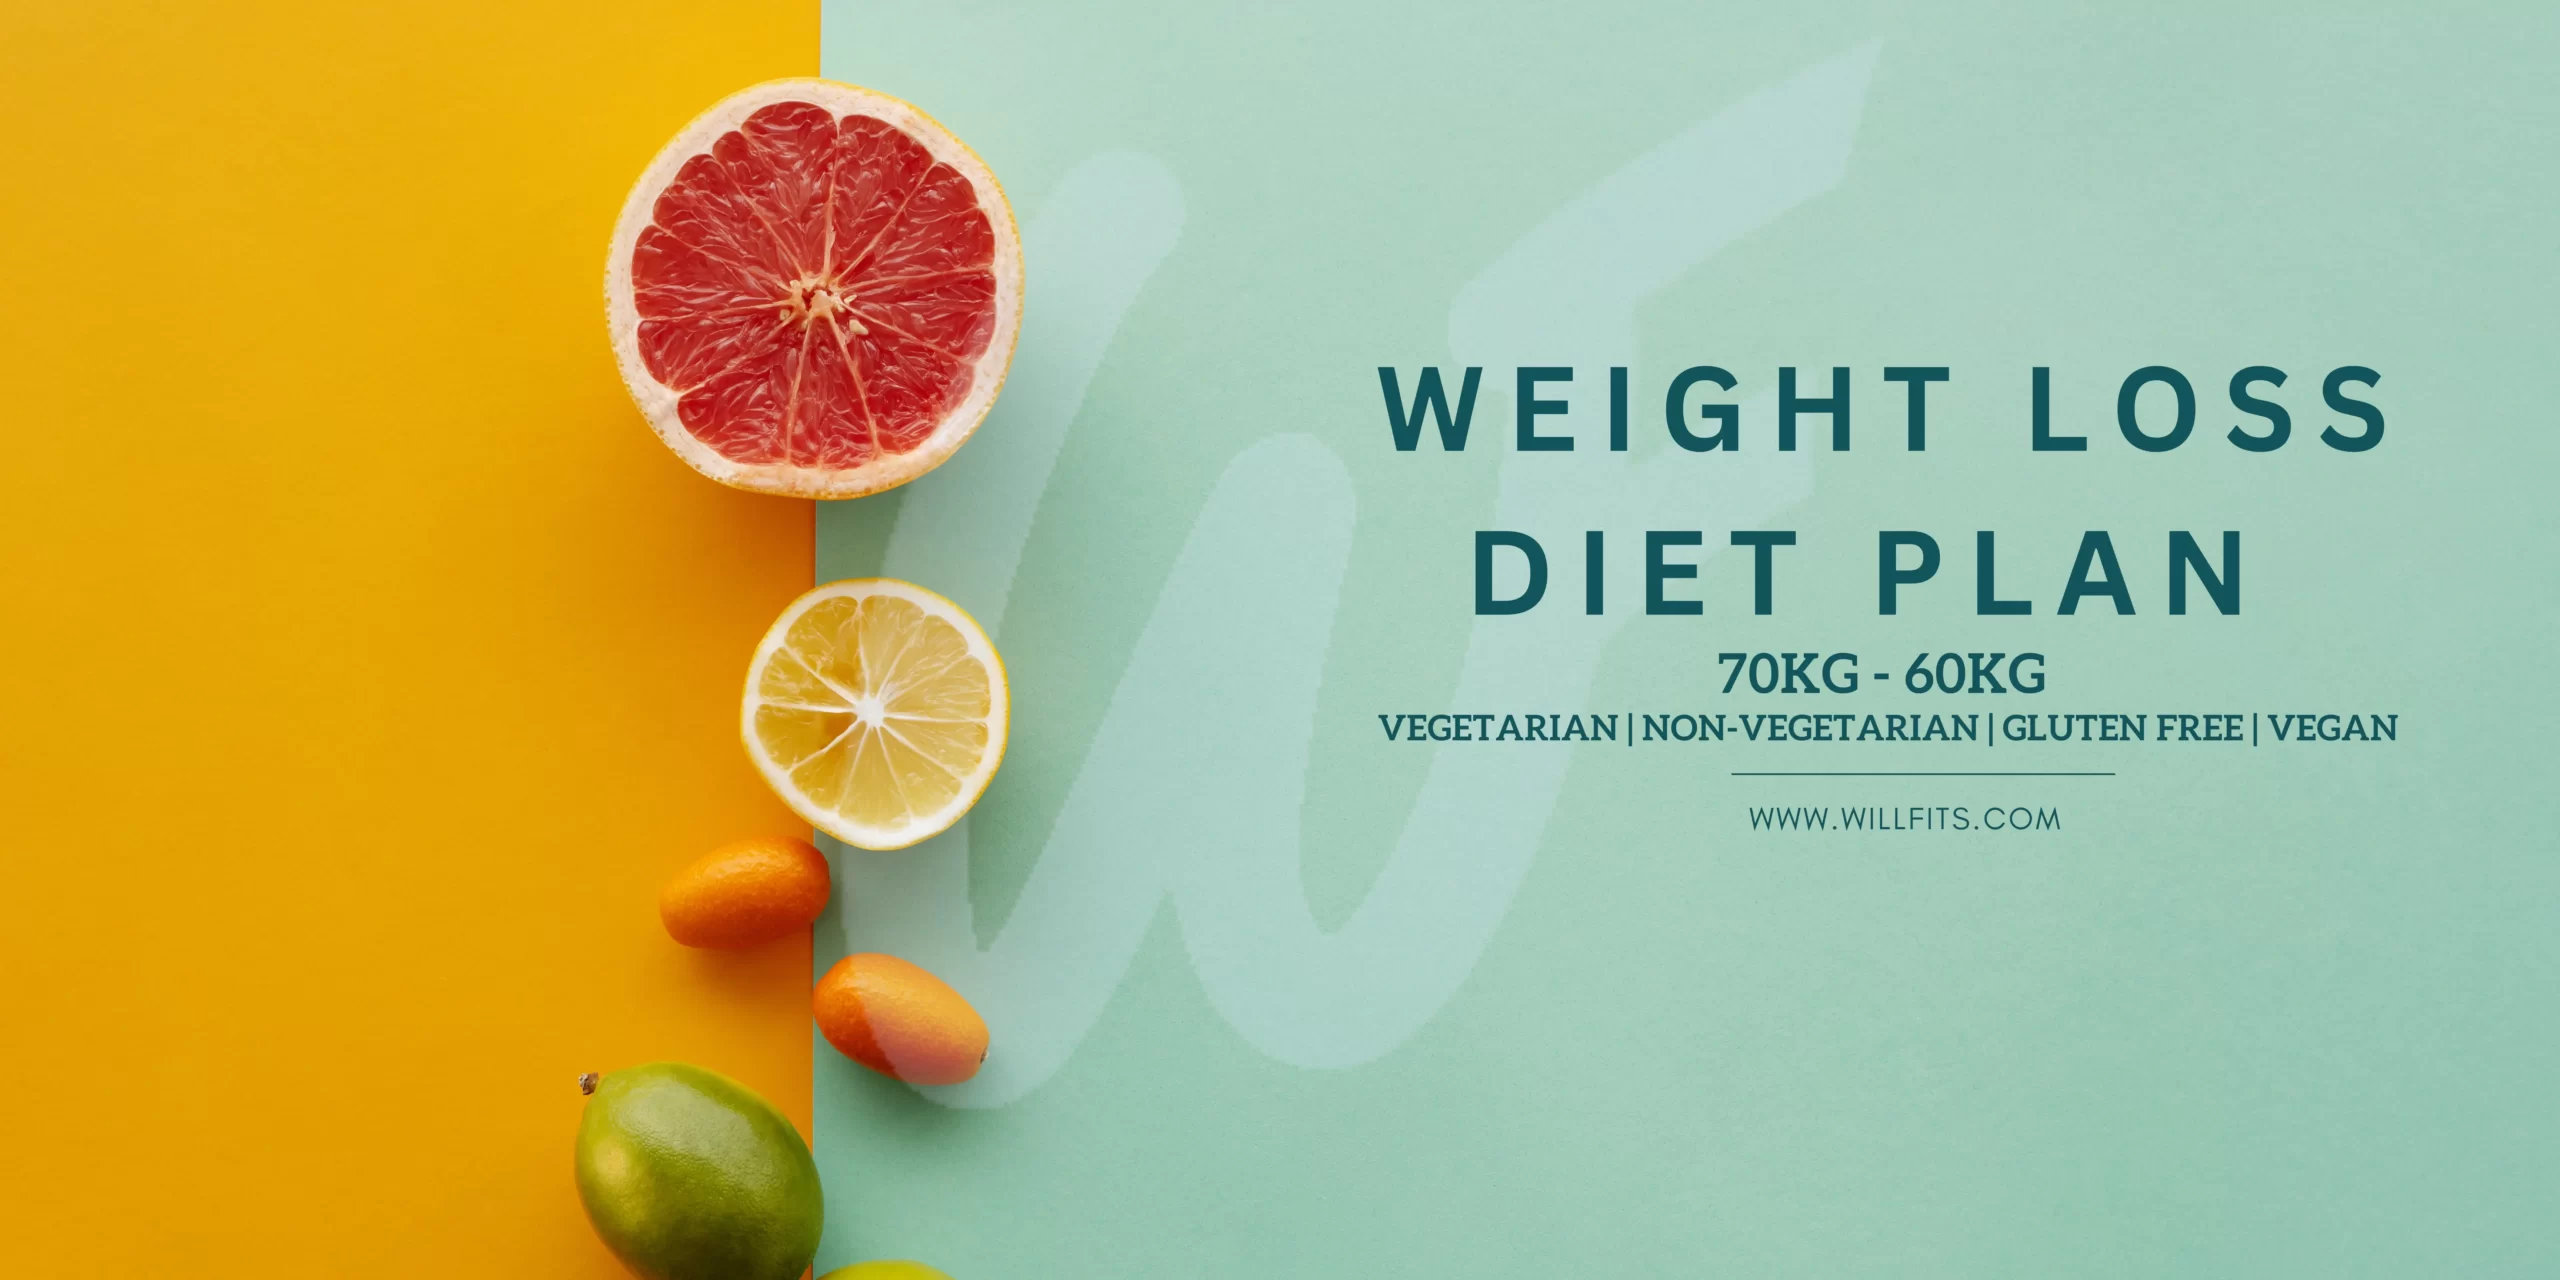 You are currently viewing Weight Loss Diet Plan 70KG – 60KG With Willfits.com